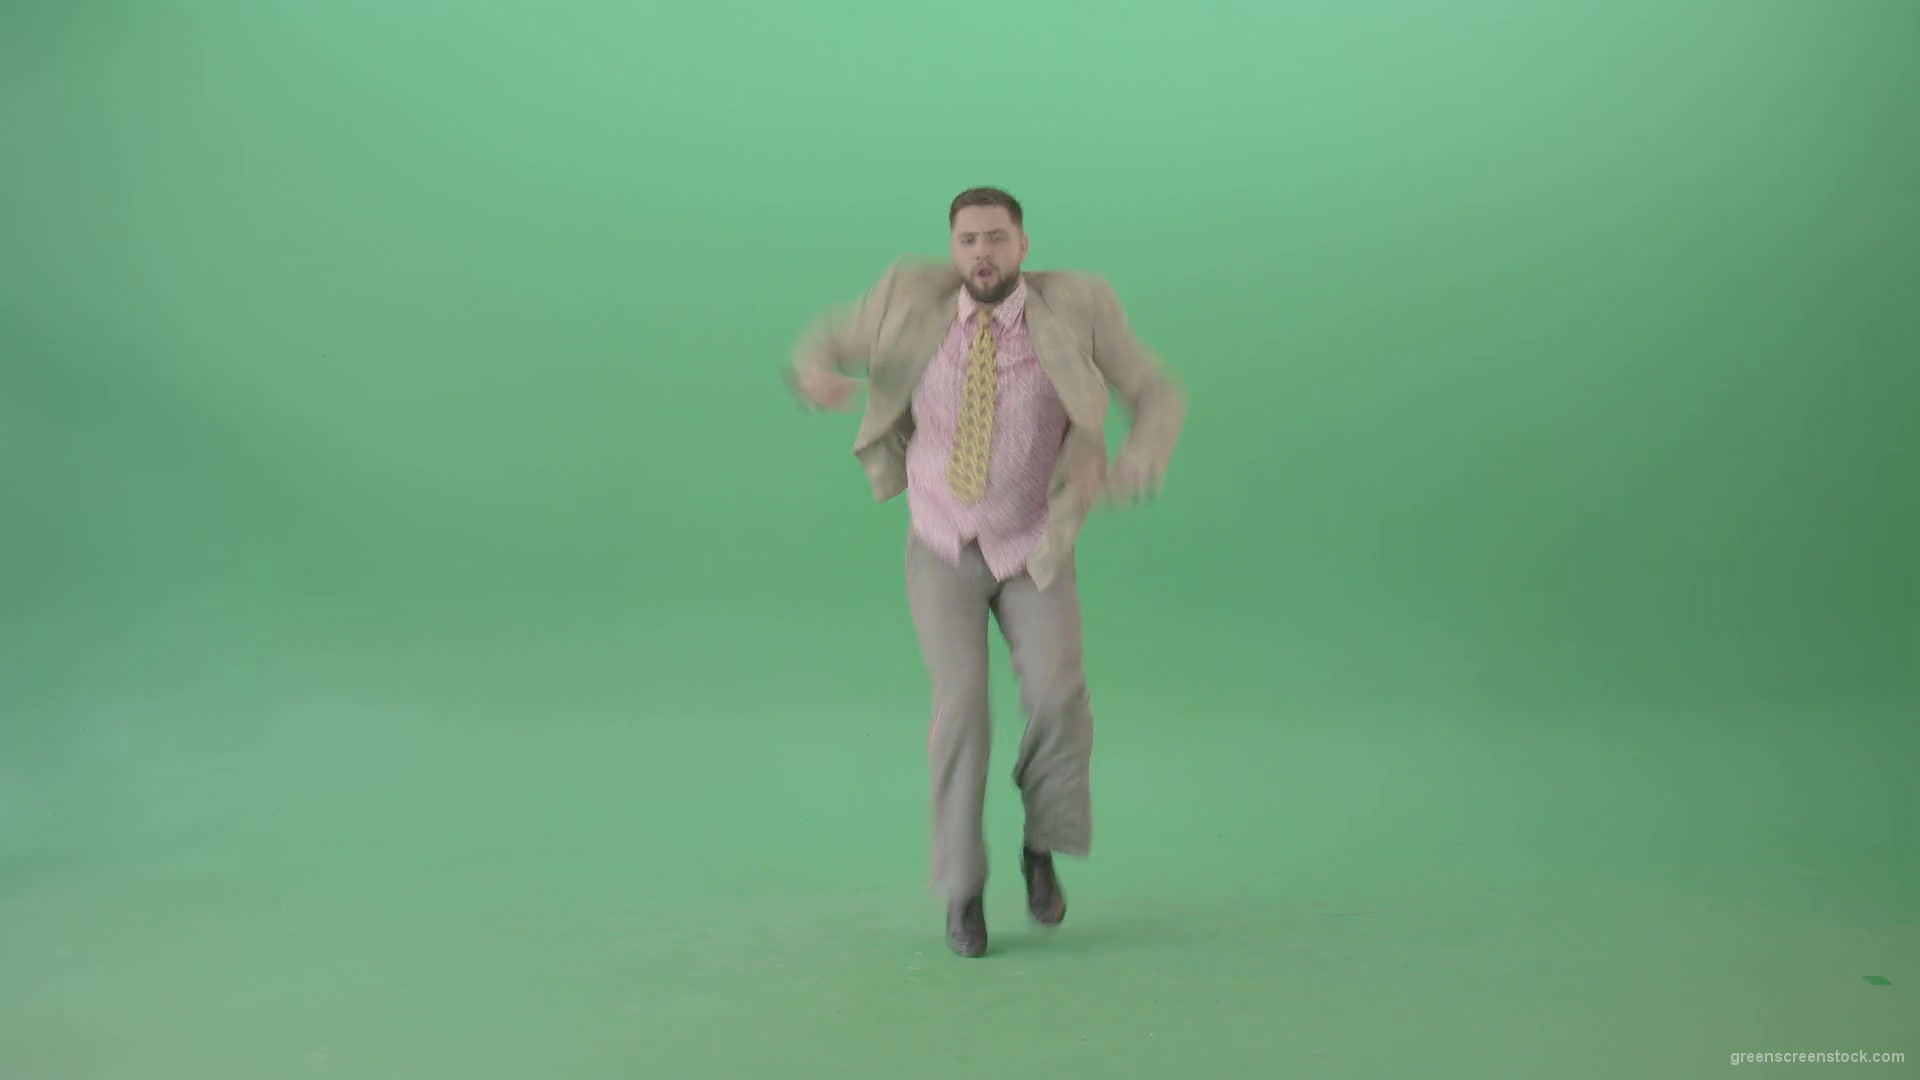 Man-dancing-shuffle-jazz-swing-Boogie-woogie-and-jumping-isolated-over-Green-Screen-4K-Video-Footage-1920_002 Green Screen Stock